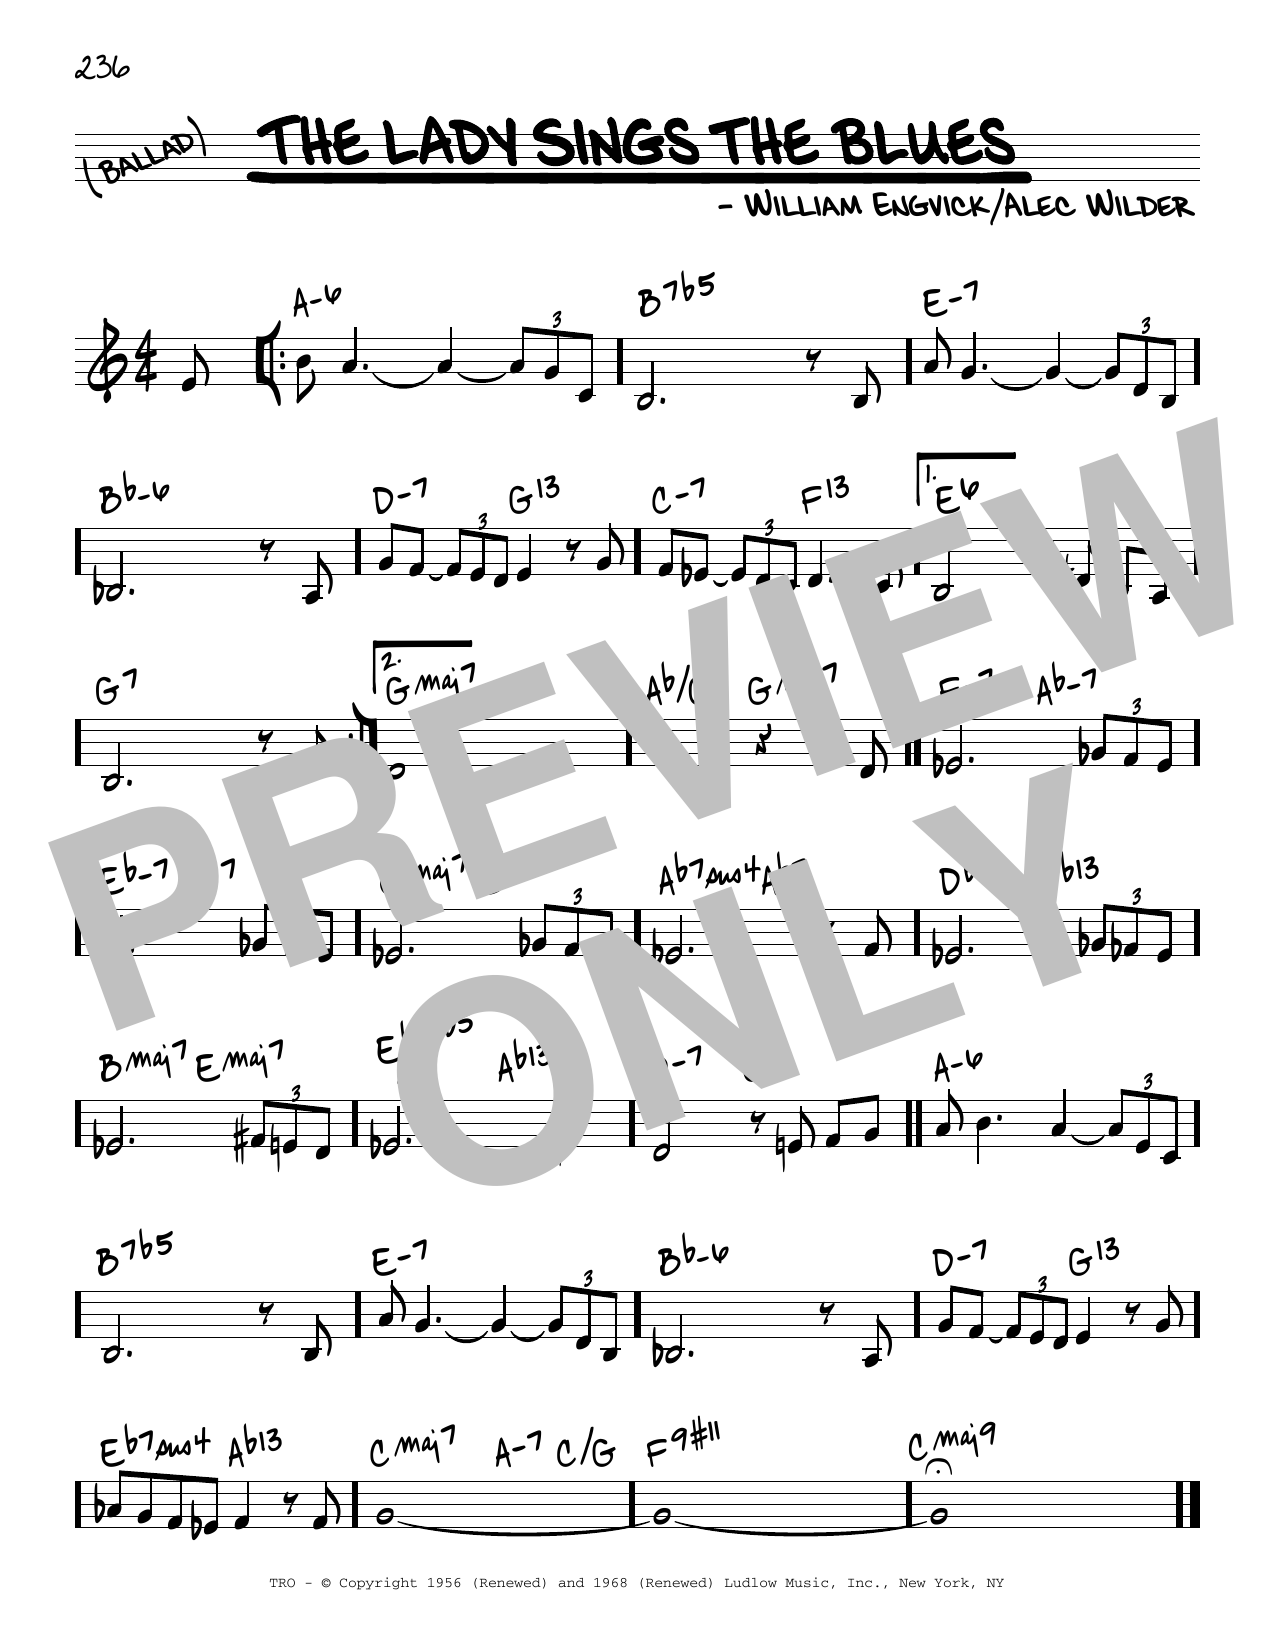 Download William Engvick The Lady Sings The Blues Sheet Music